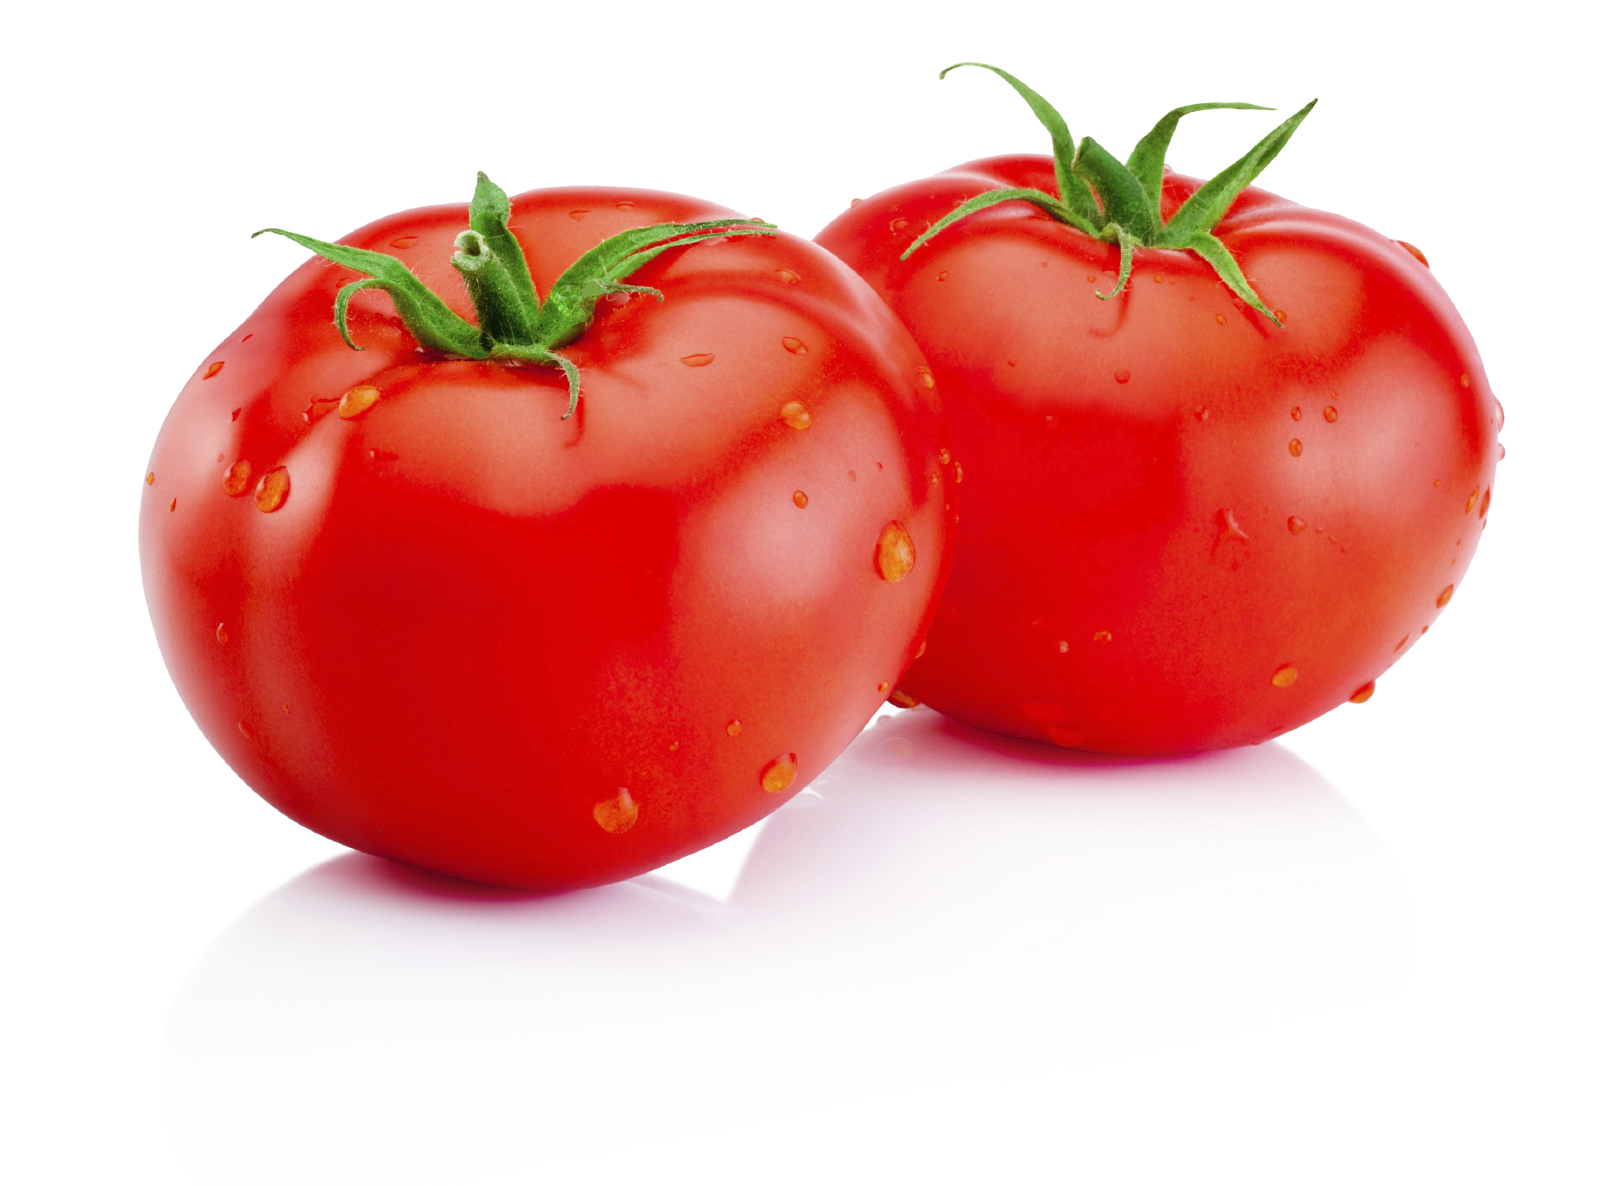 Two wet red tomatoes isolated on white background - UC Davis ...